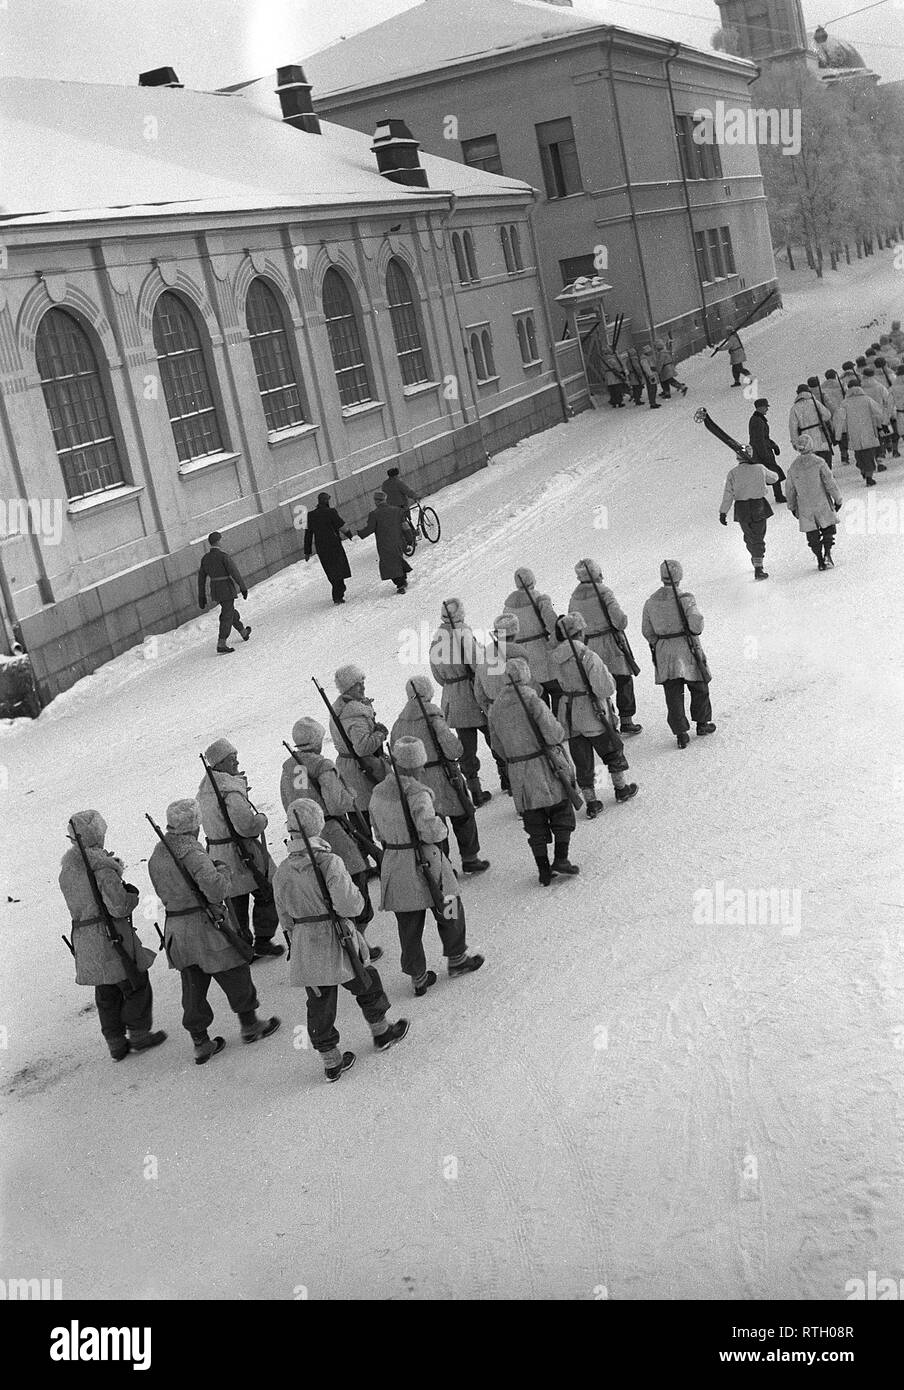 The Winter War. A military conflict between the Soviet union and Finland. It began with a Soviet invasion on november 1939 when Soviet infantery crossed the border on the Karelian Isthmus. About 9500 Swedish volunteer soldiers participated in the war.  Pictured Danish volunteer soldiers marching. January 1940. Photo Kristoffersson ref 101-7. Stock Photo